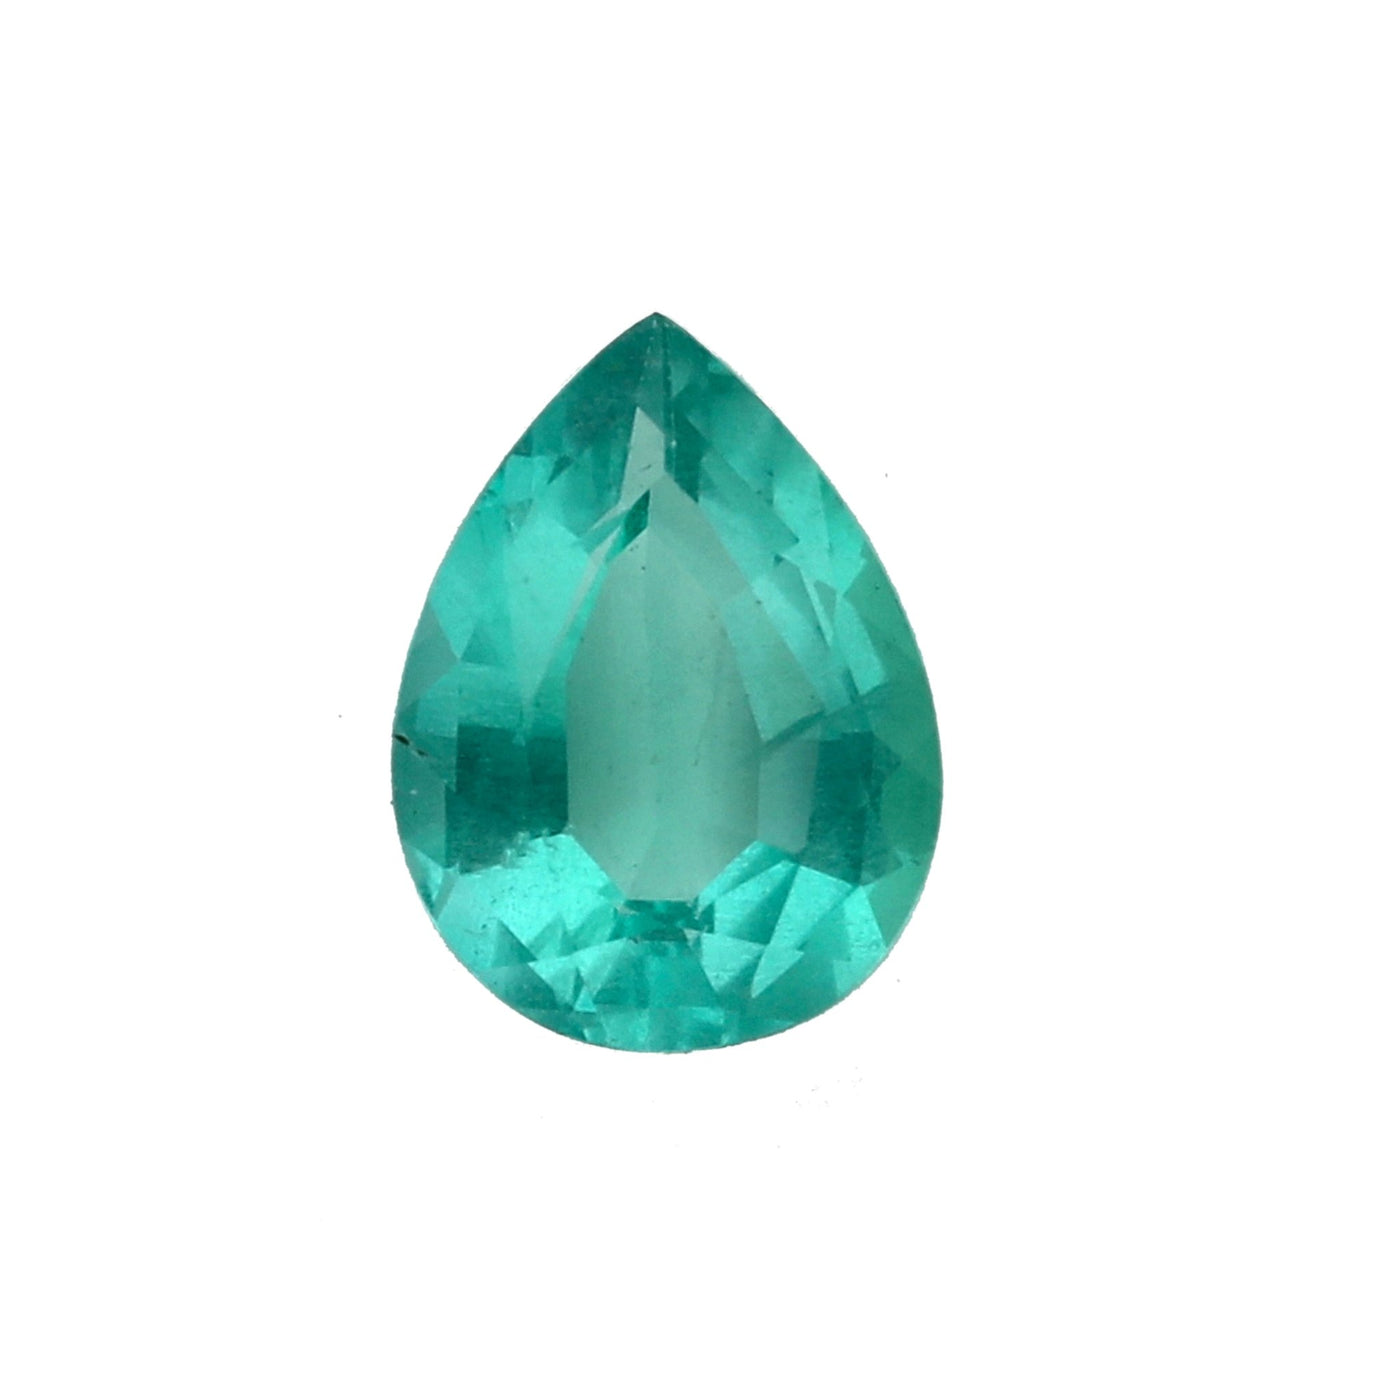 0.86CT Pear Shaped Emerald - Belmont Sparkle